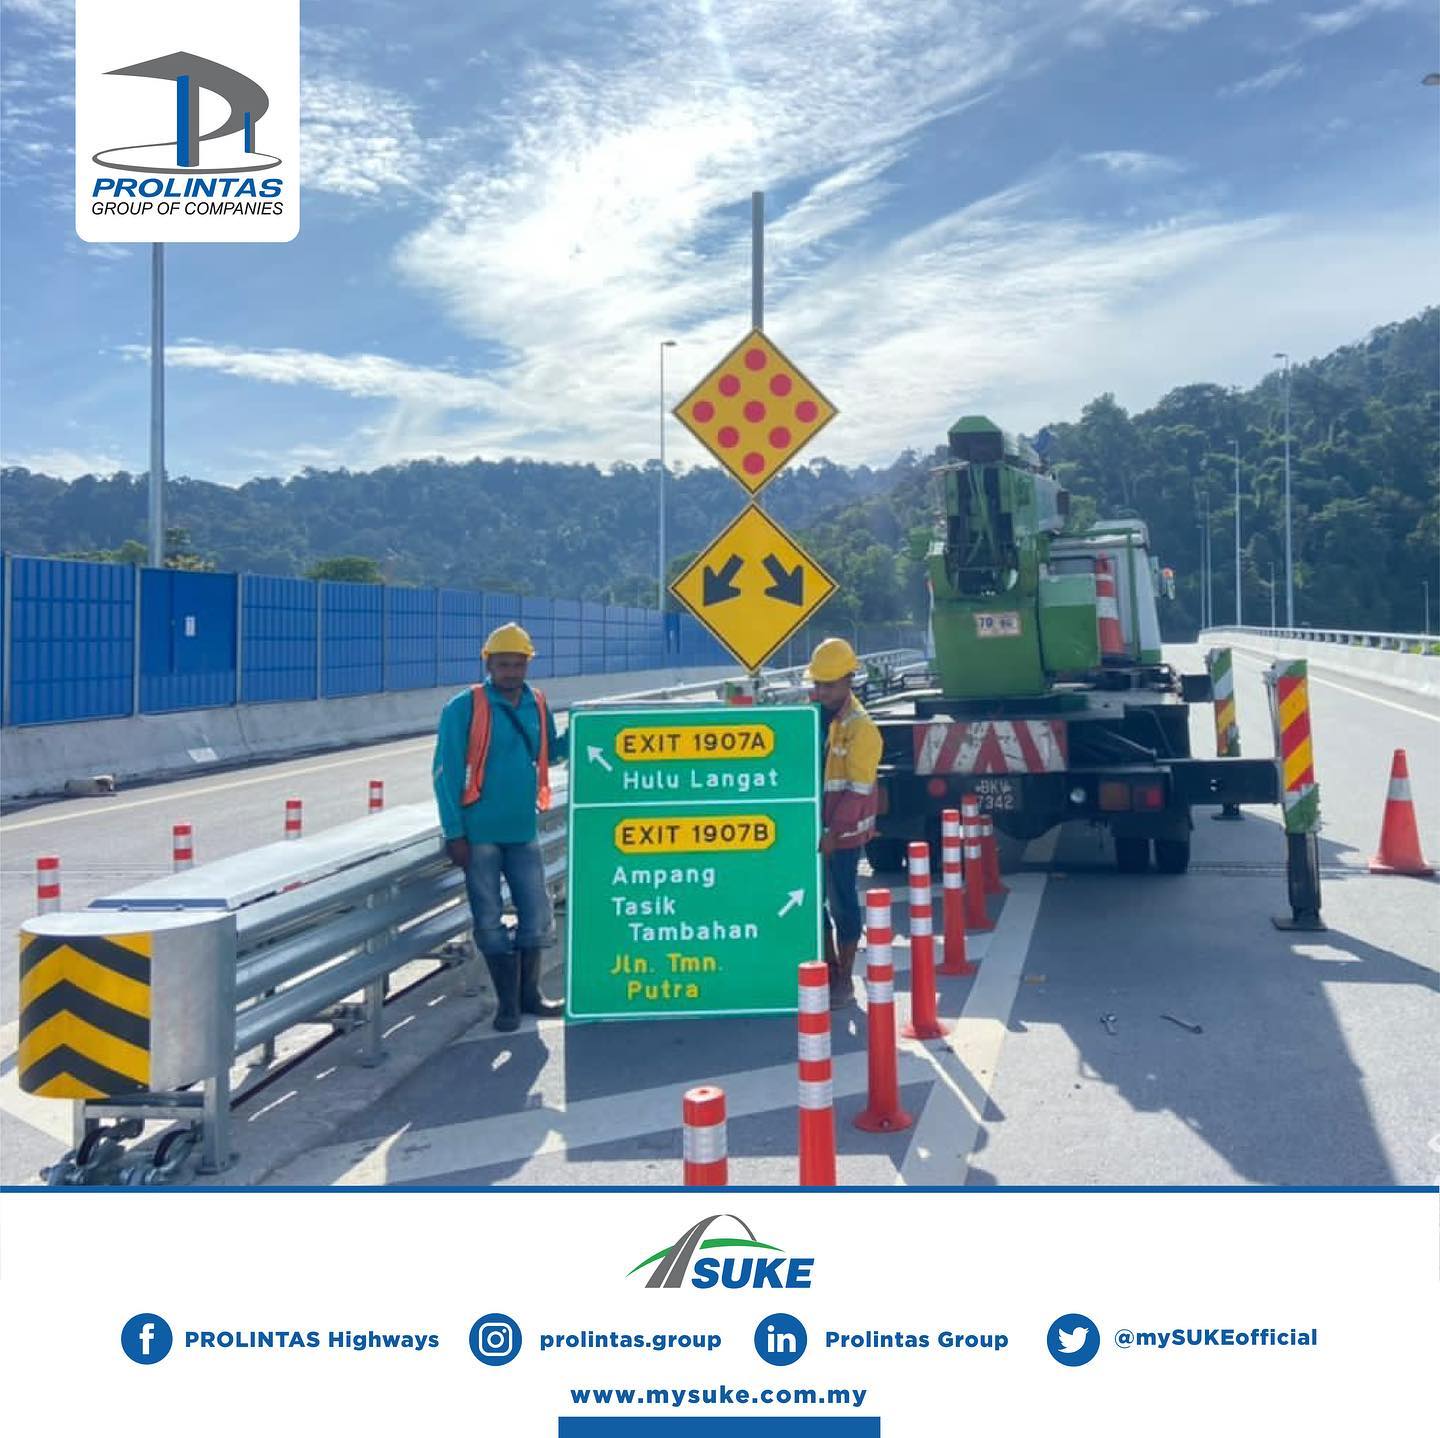 Highway company PROLINTAS has confirmed that the mini sign has been removed from SUKE Highway. Image credit: PROLINTAS Highways